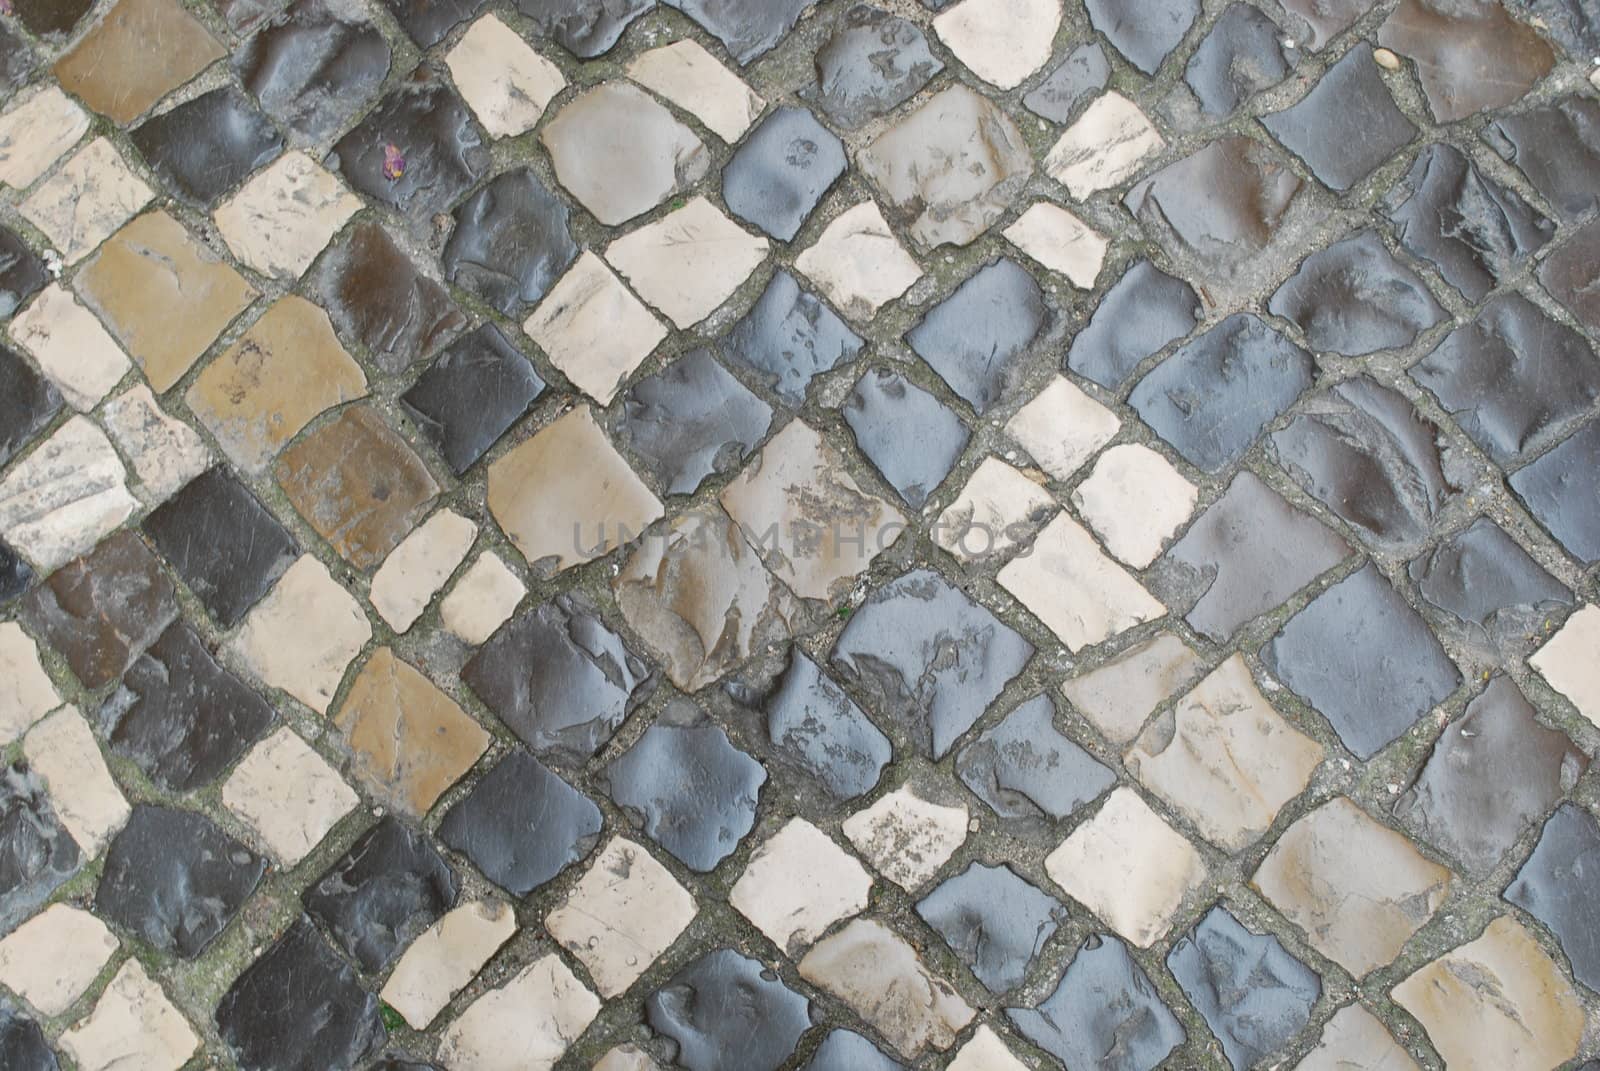 Colorful stones pavement also know as "Cal�ada" by luissantos84